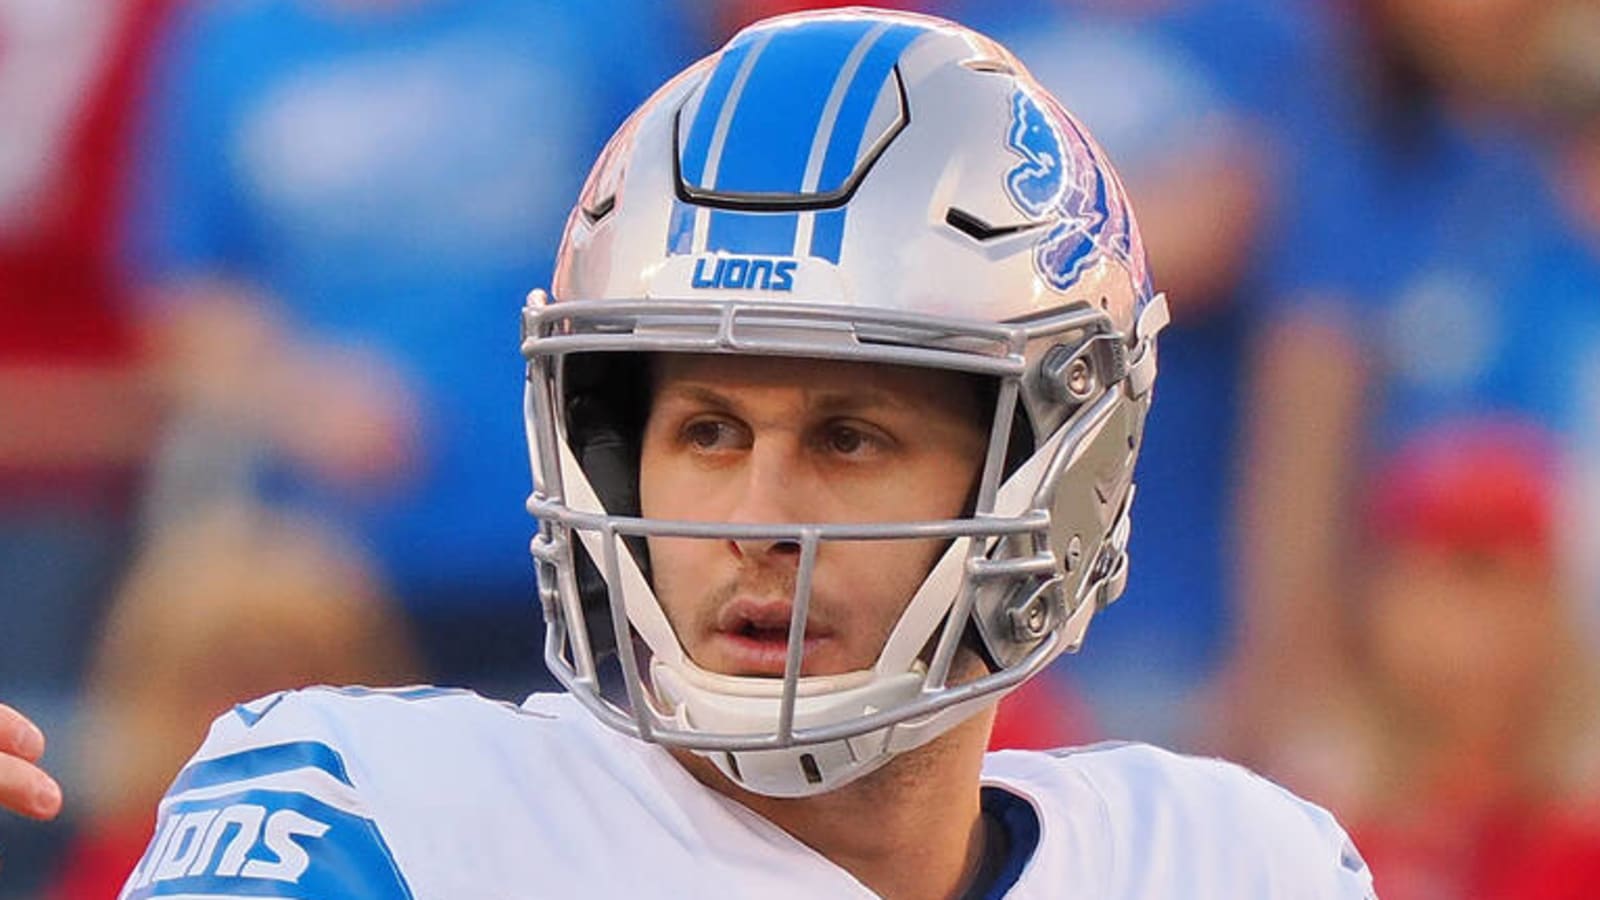 Extension makes Lions QB Jared Goff one of NFL's top earners